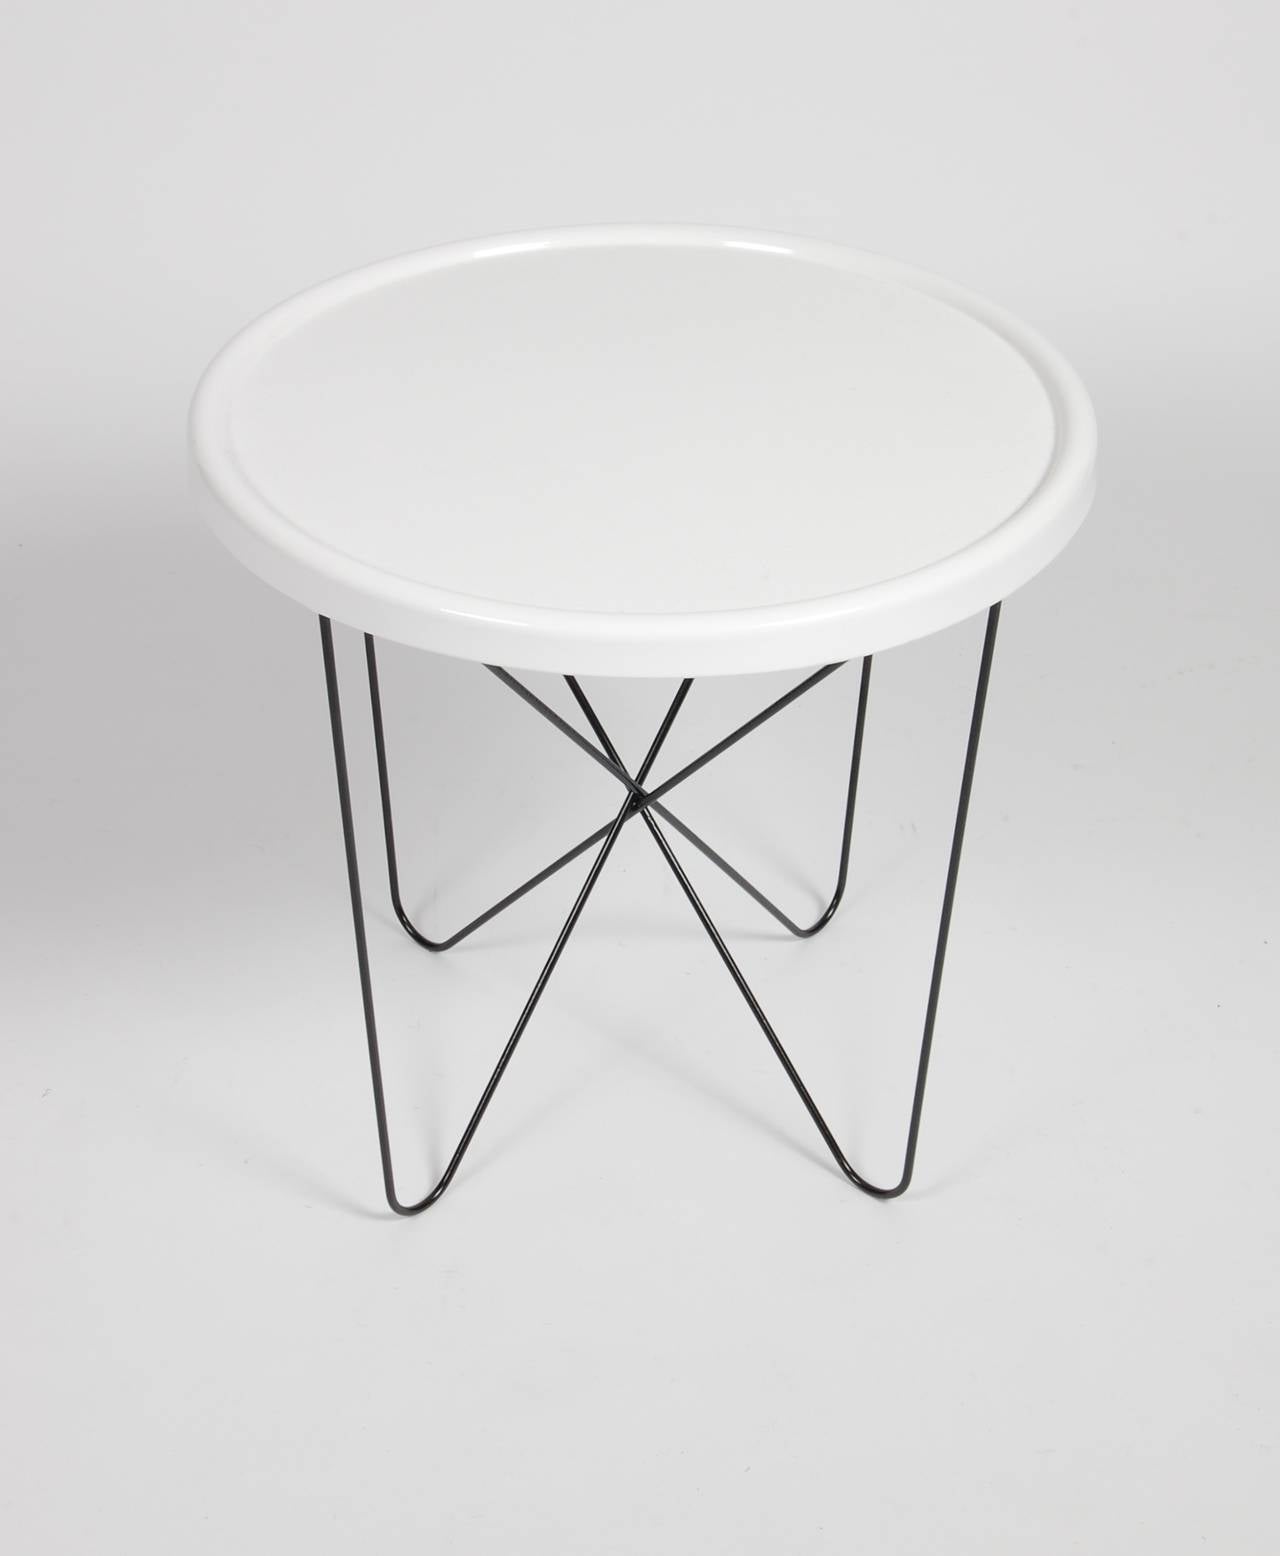 Circular white metal top patio table with black wire frame legs that can detach and fold for easy storage.